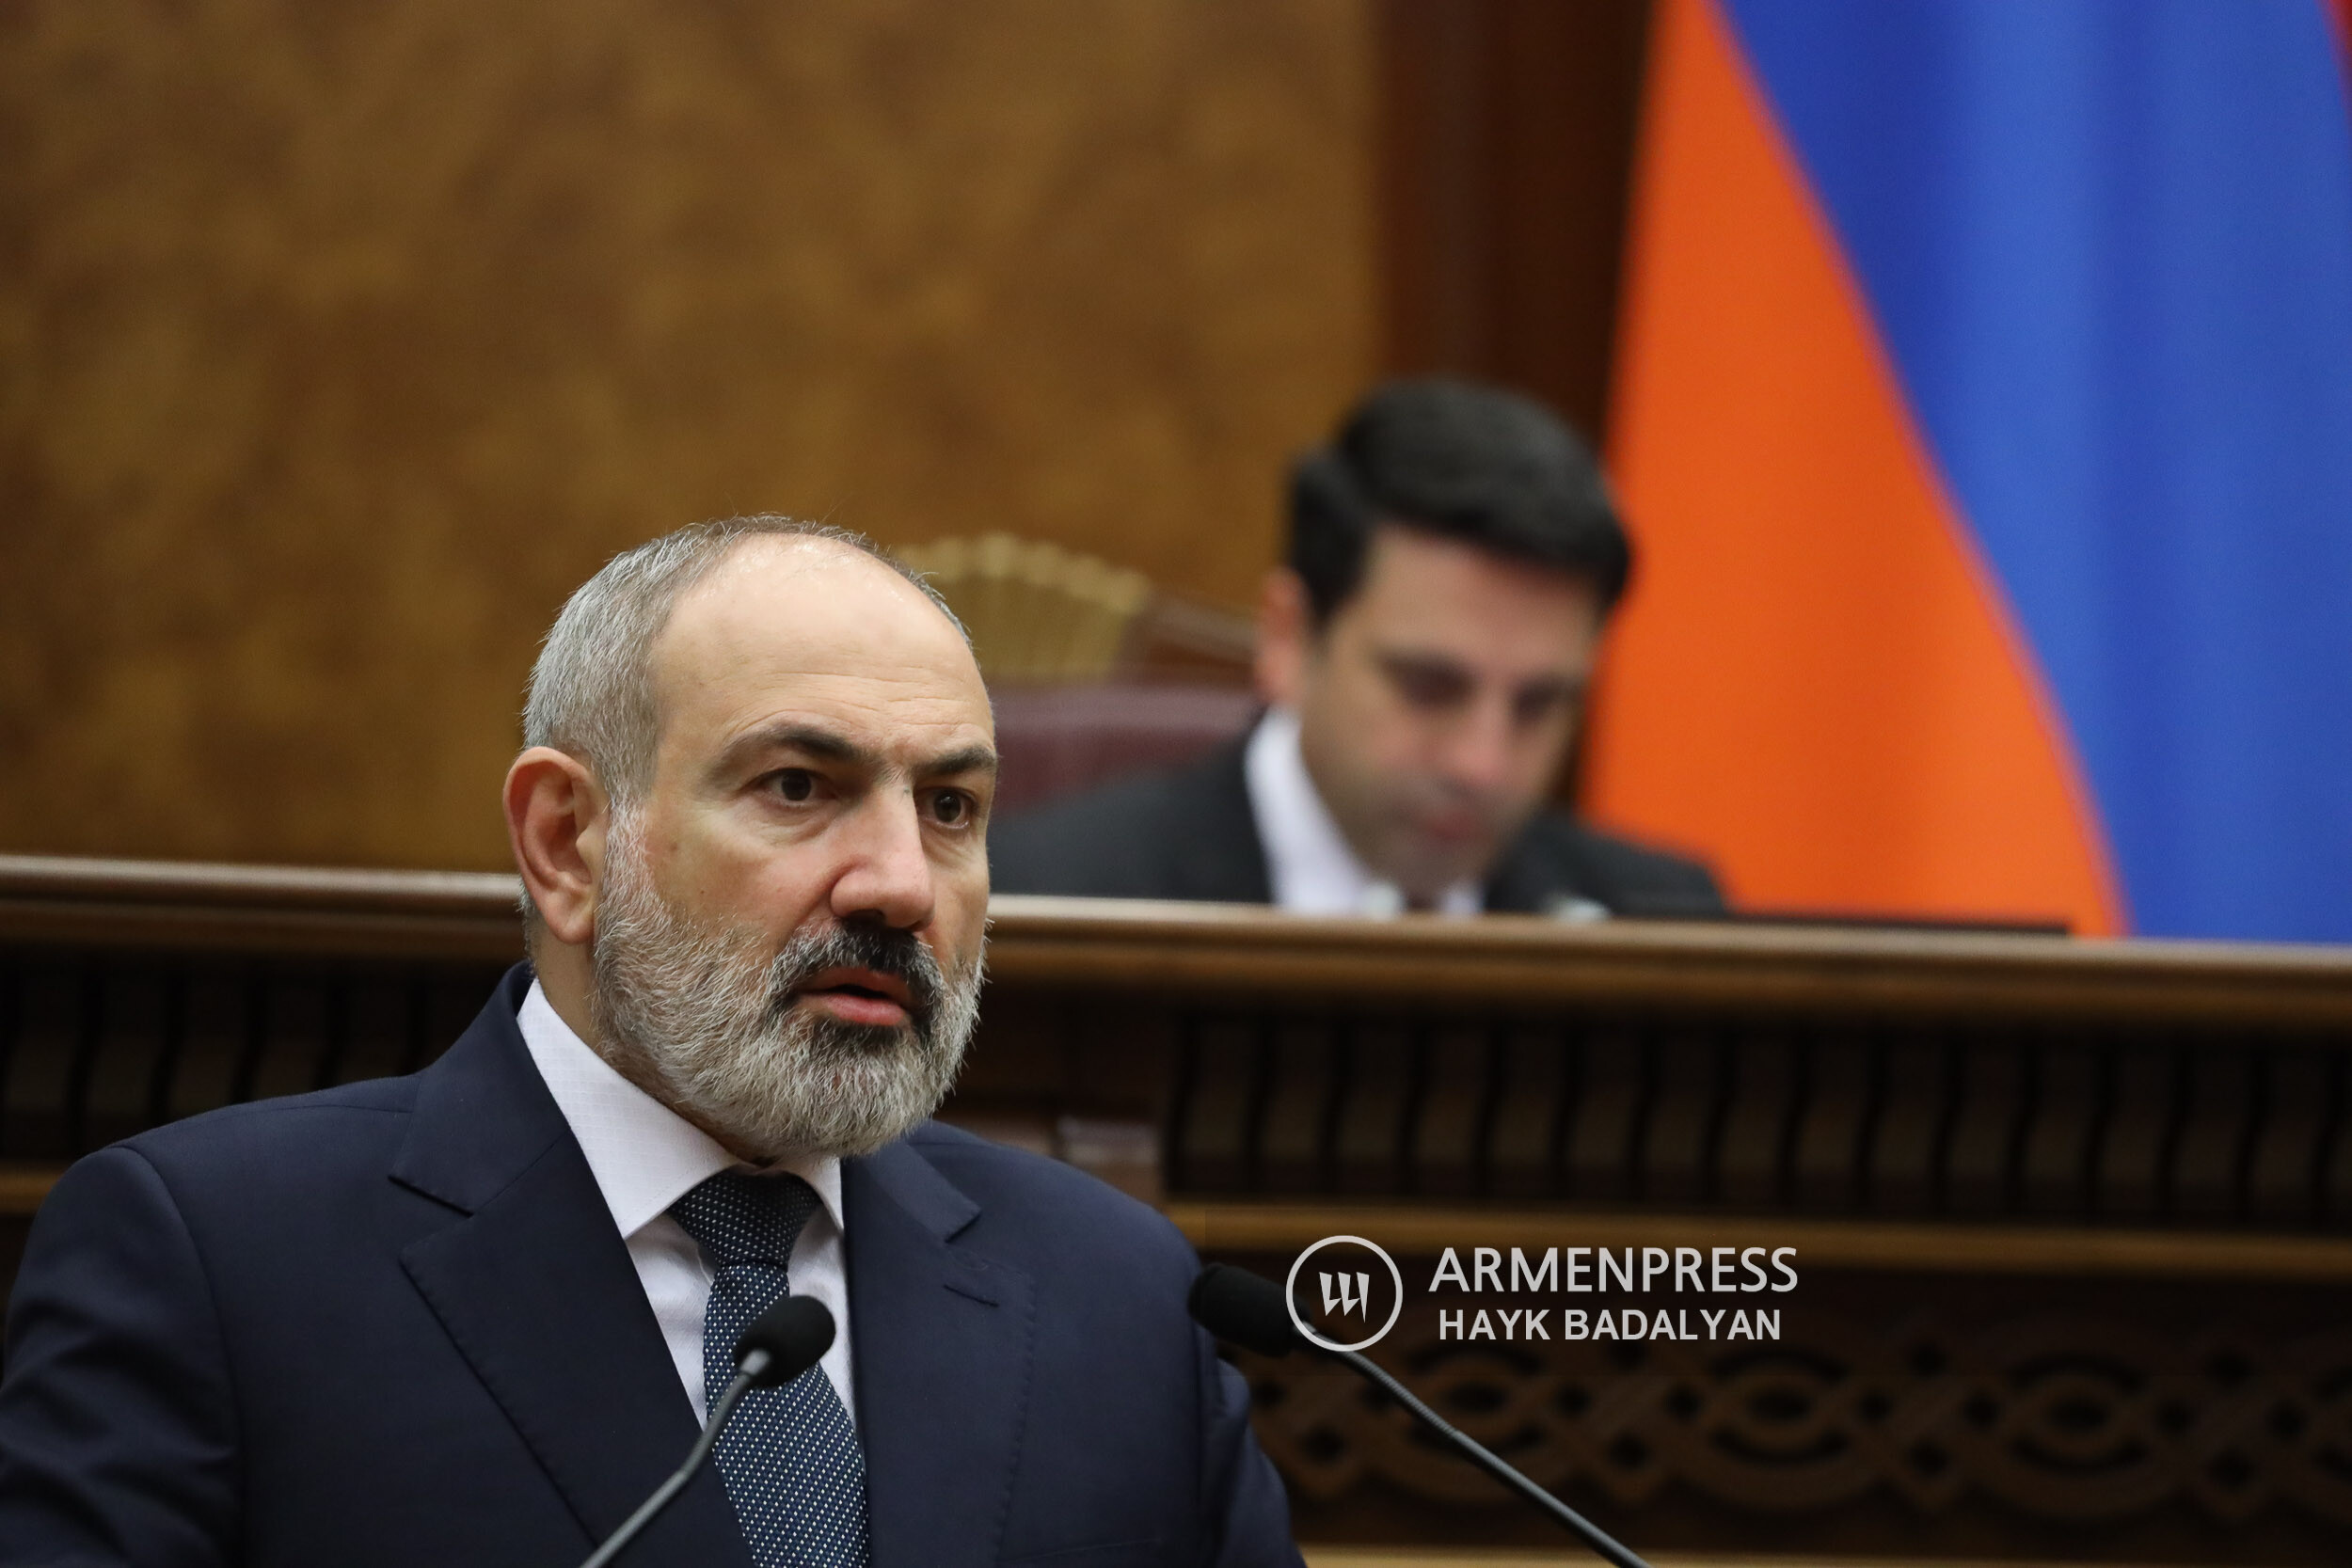 Neither Pashinyan nor Armenian officials will visit Belarus while Lukashenko is president